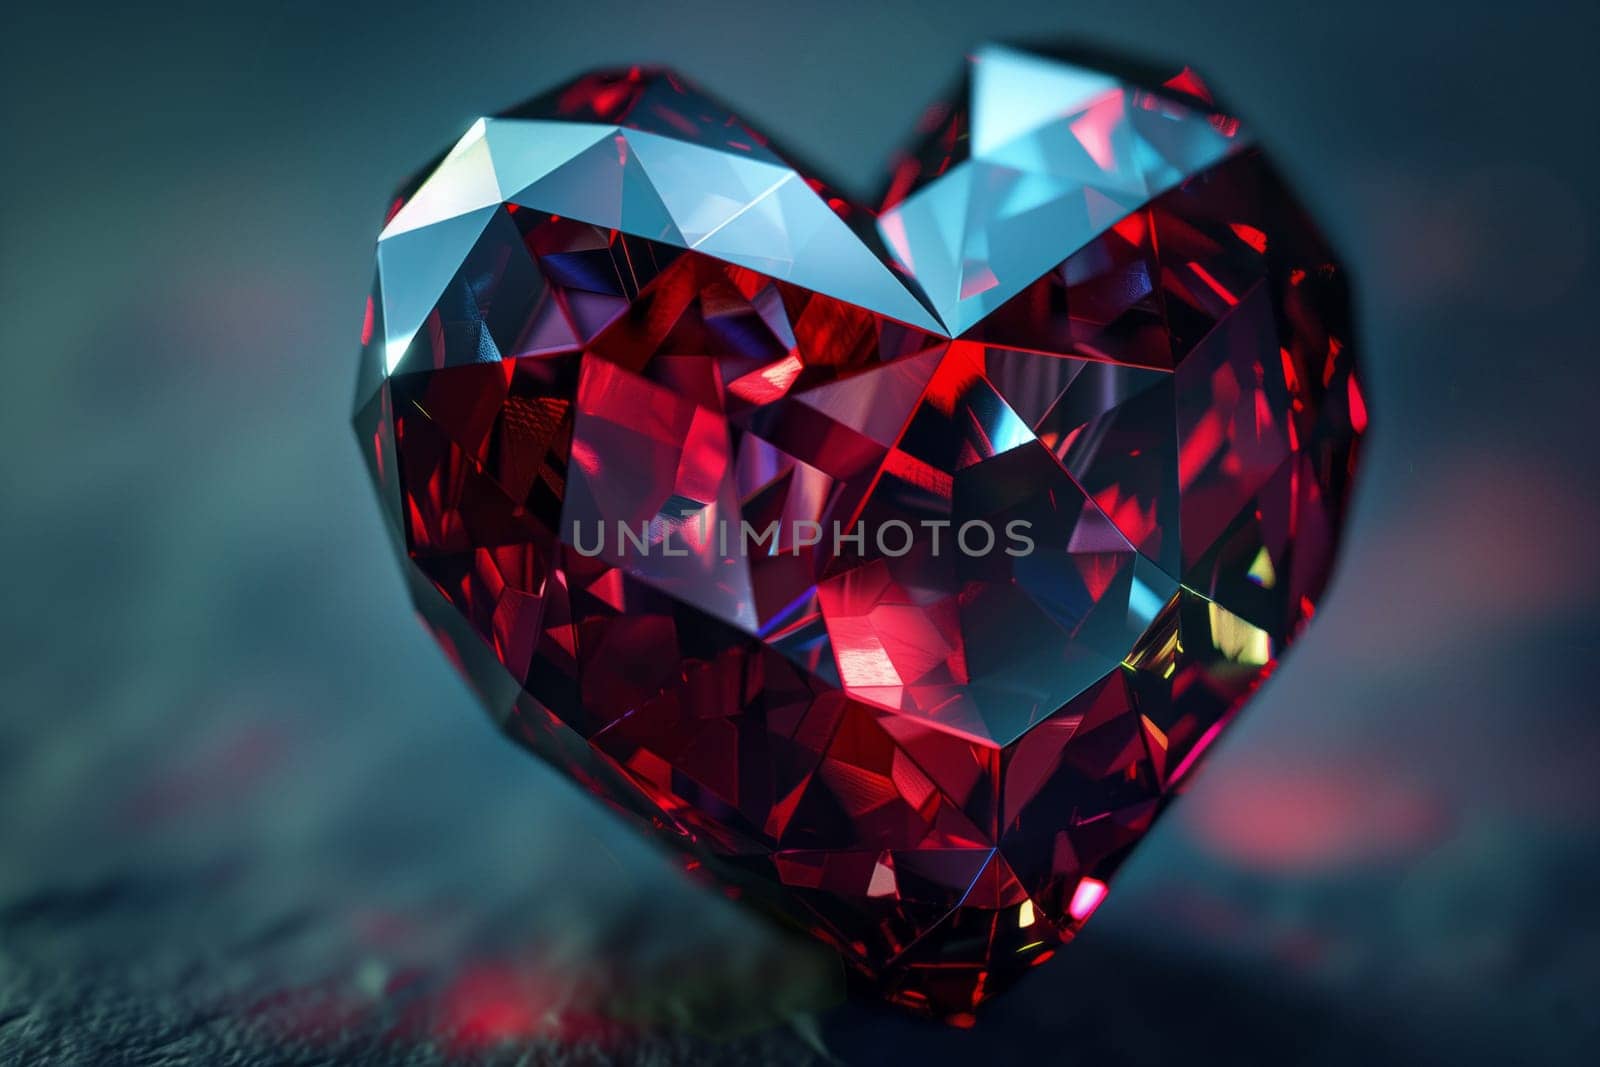 A close up image of a red heart shaped diamond on a glass table, sparkling with electric blue and magenta hues. This gemstone, Amber, is a stunning piece of body jewelry for any special event